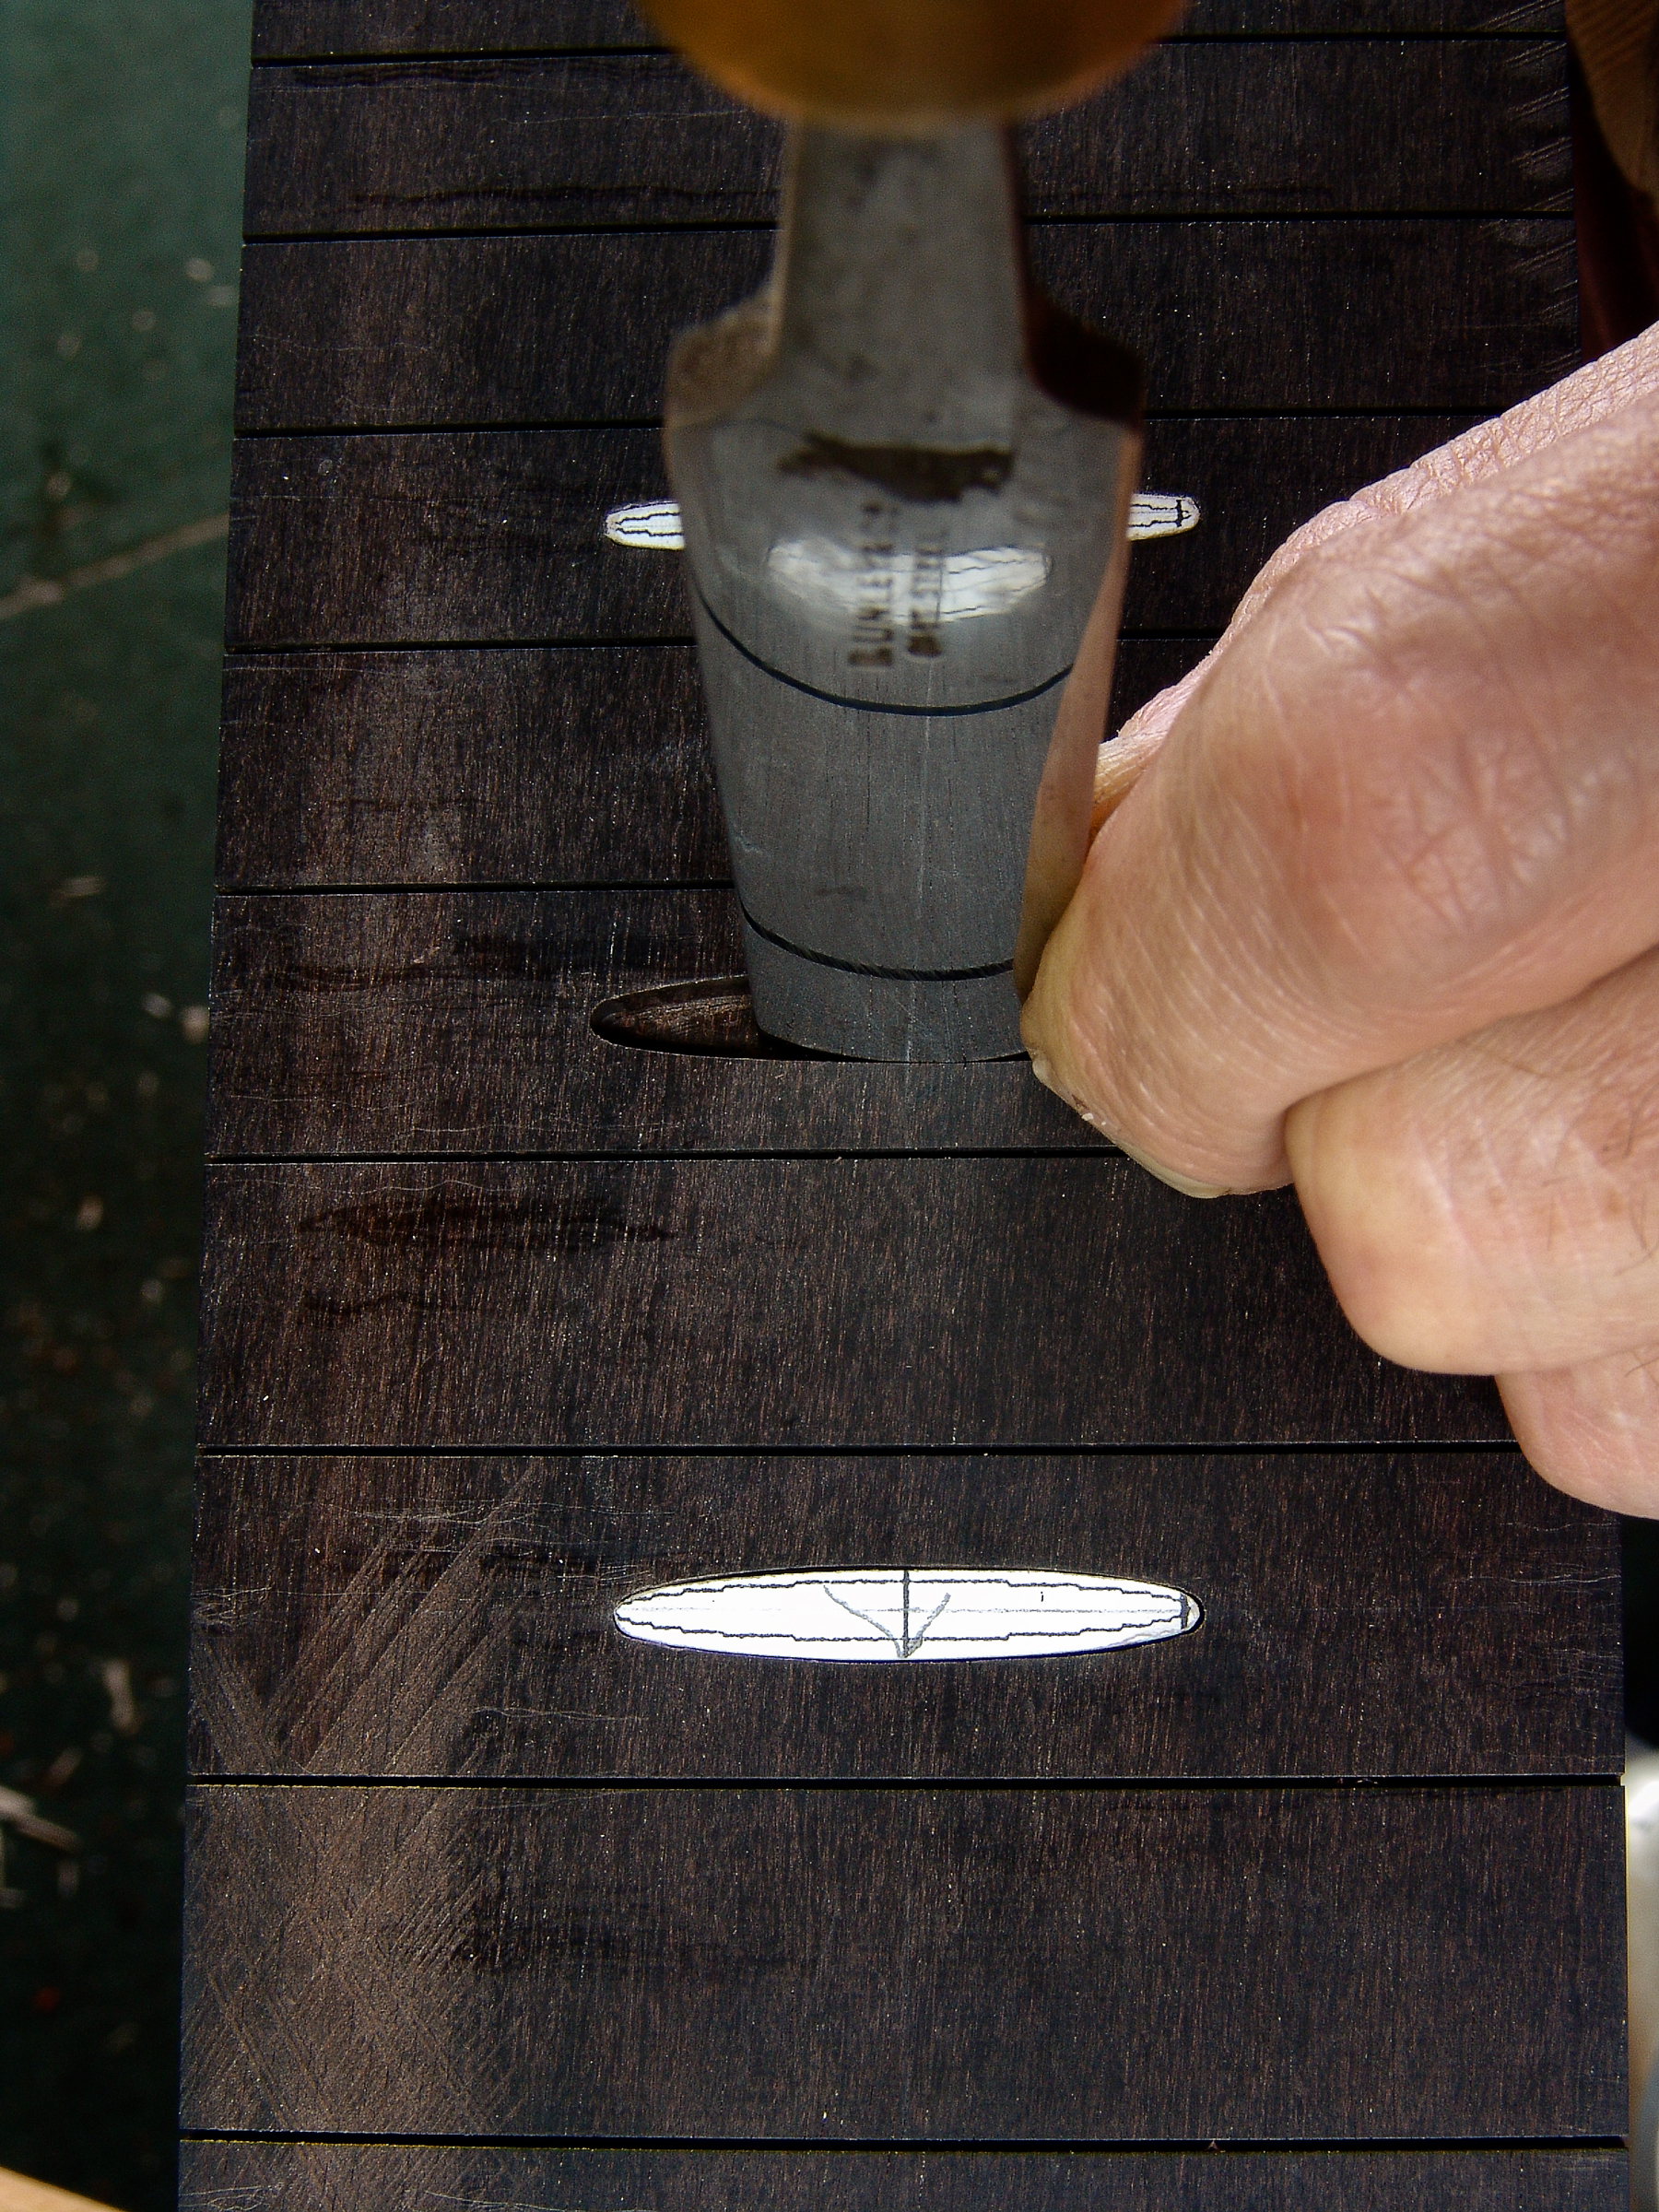 Guitar maker Peter Stephen works the inlays on a guitar neck